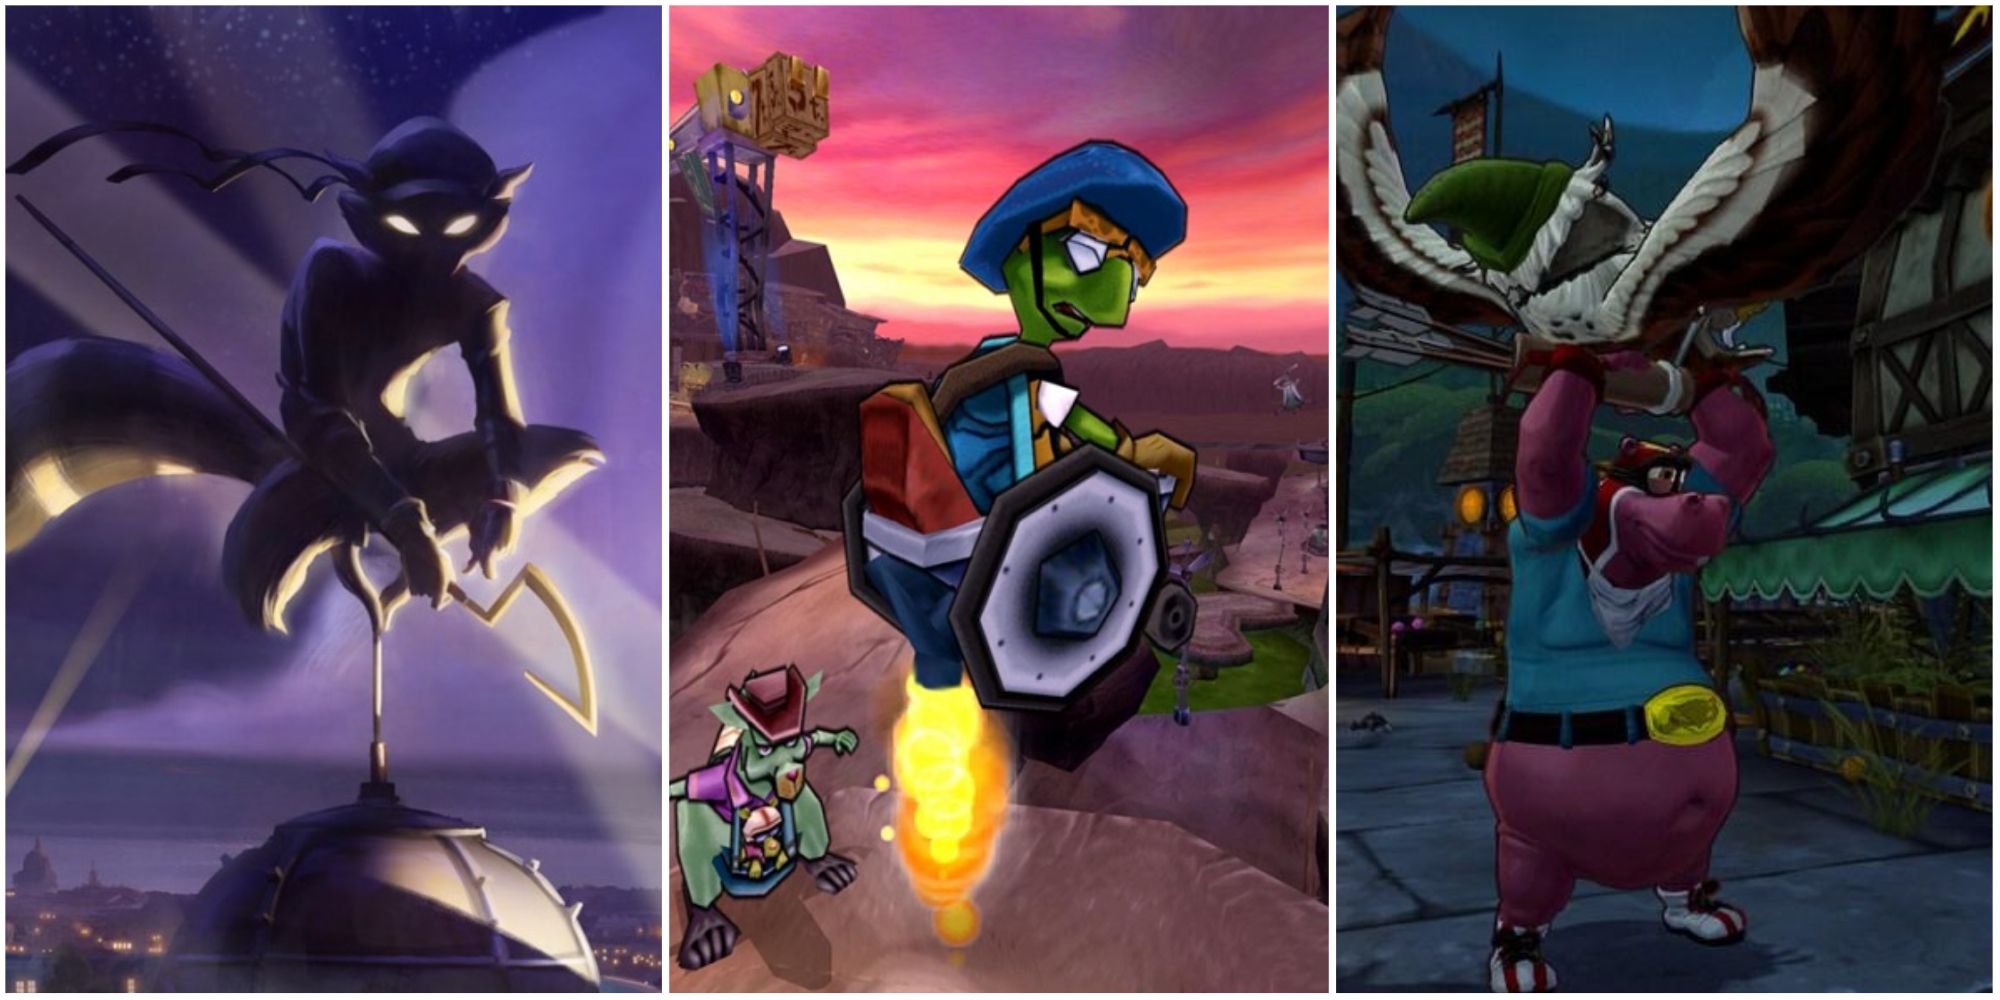 Sly, Bentley, and Murray Gameplay in the Sly Cooper Series